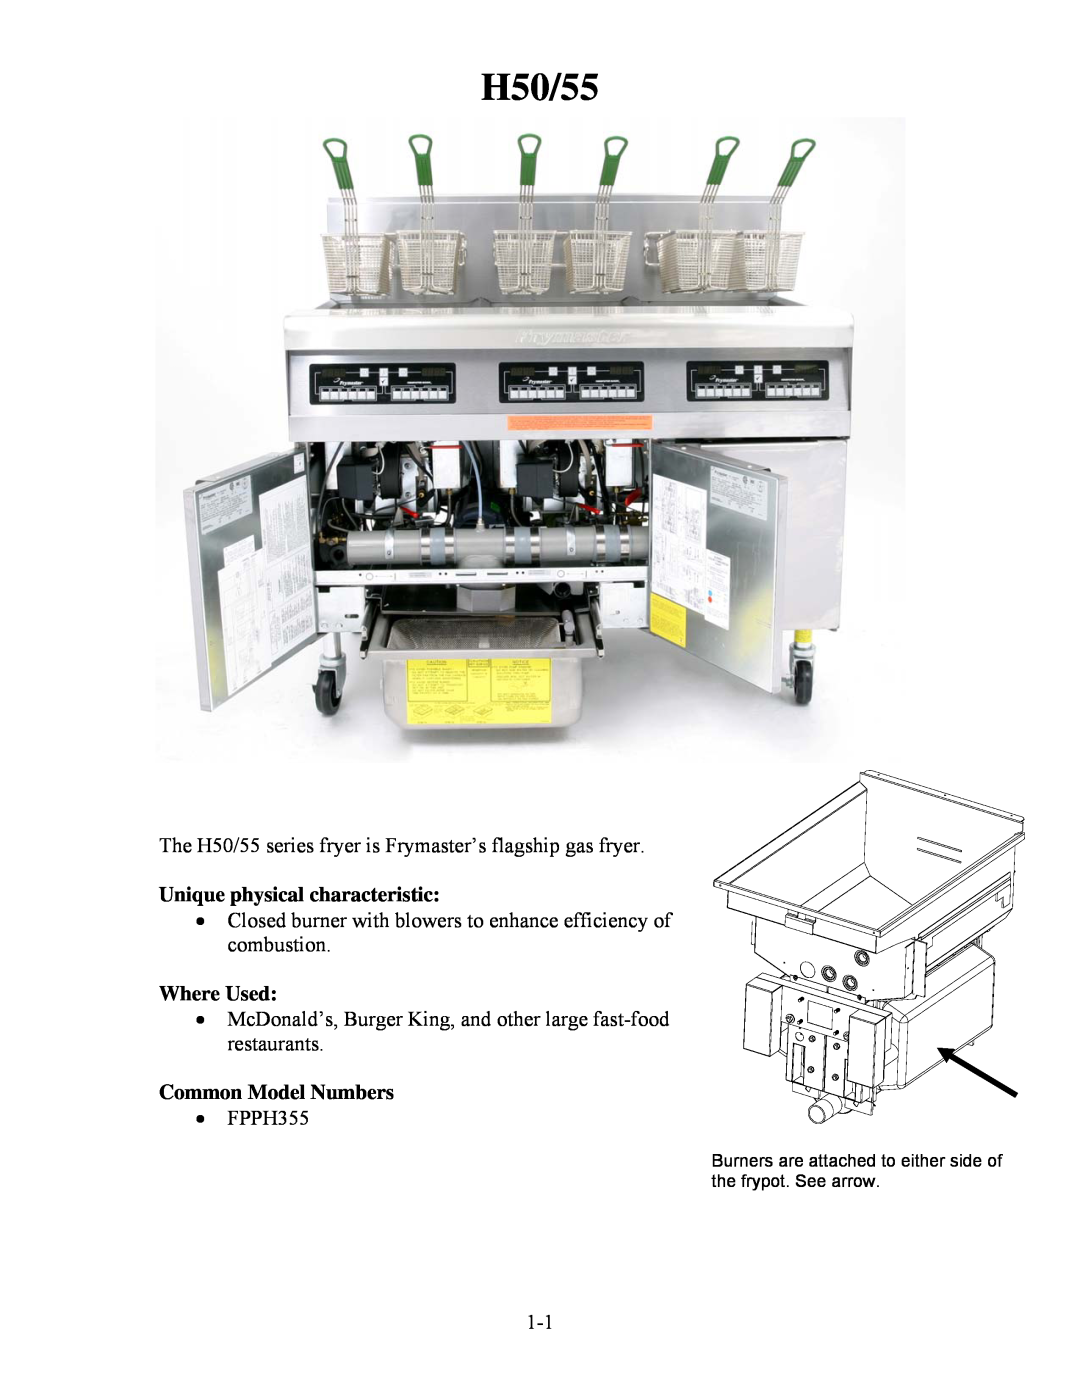 Frymaster H55 The H50/55 series fryer is Frymaster’s flagship gas fryer, Unique physical characteristic, Where Used 